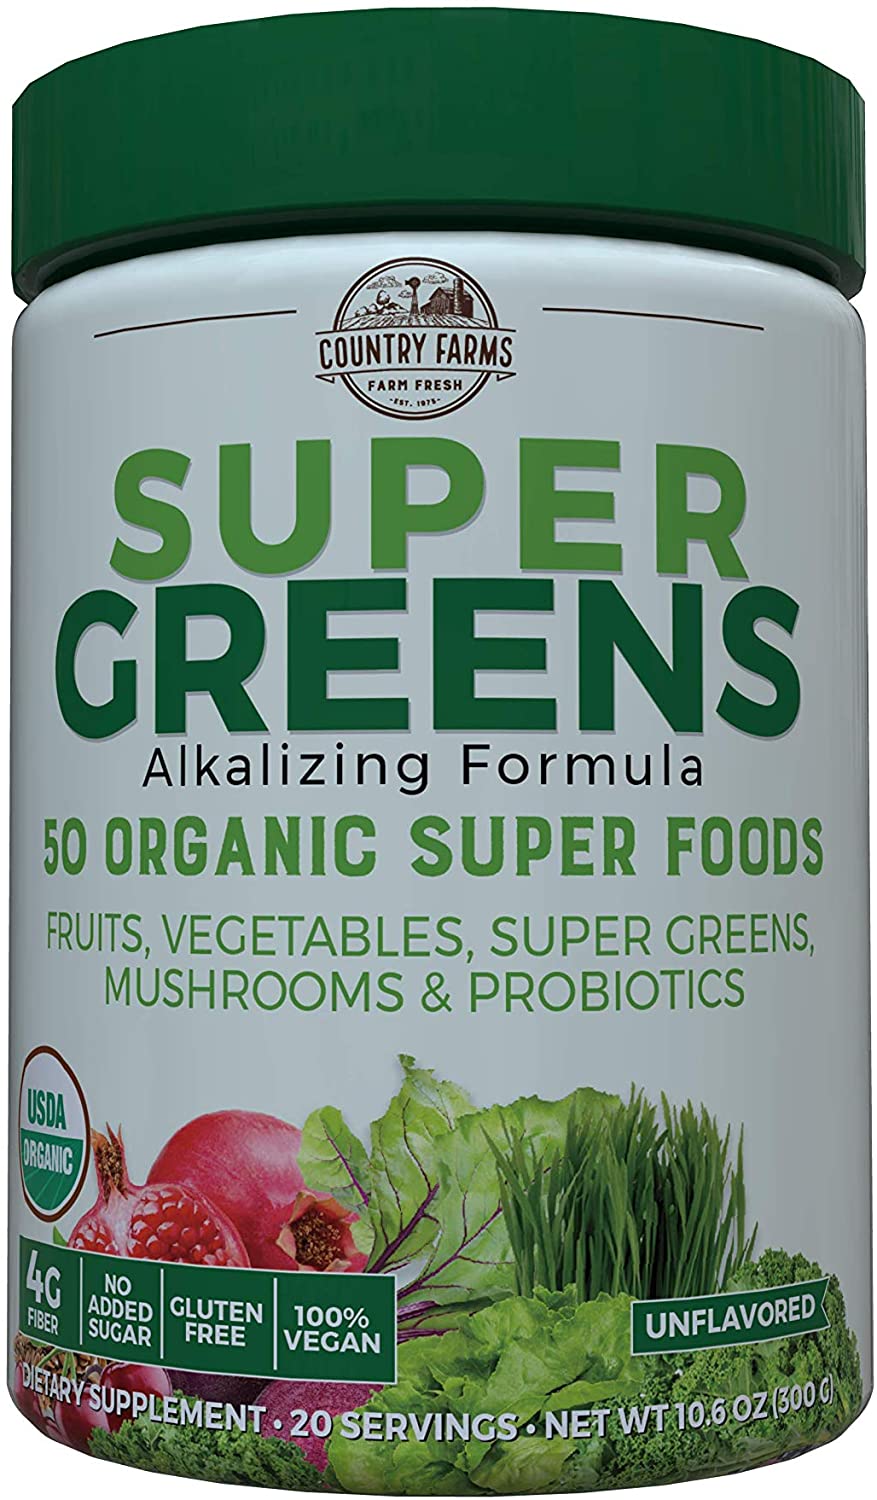 Country Farms Super Green Organic Supplement - Fruit and Vegetable Supplements - Top 10 best Vegetable supplements